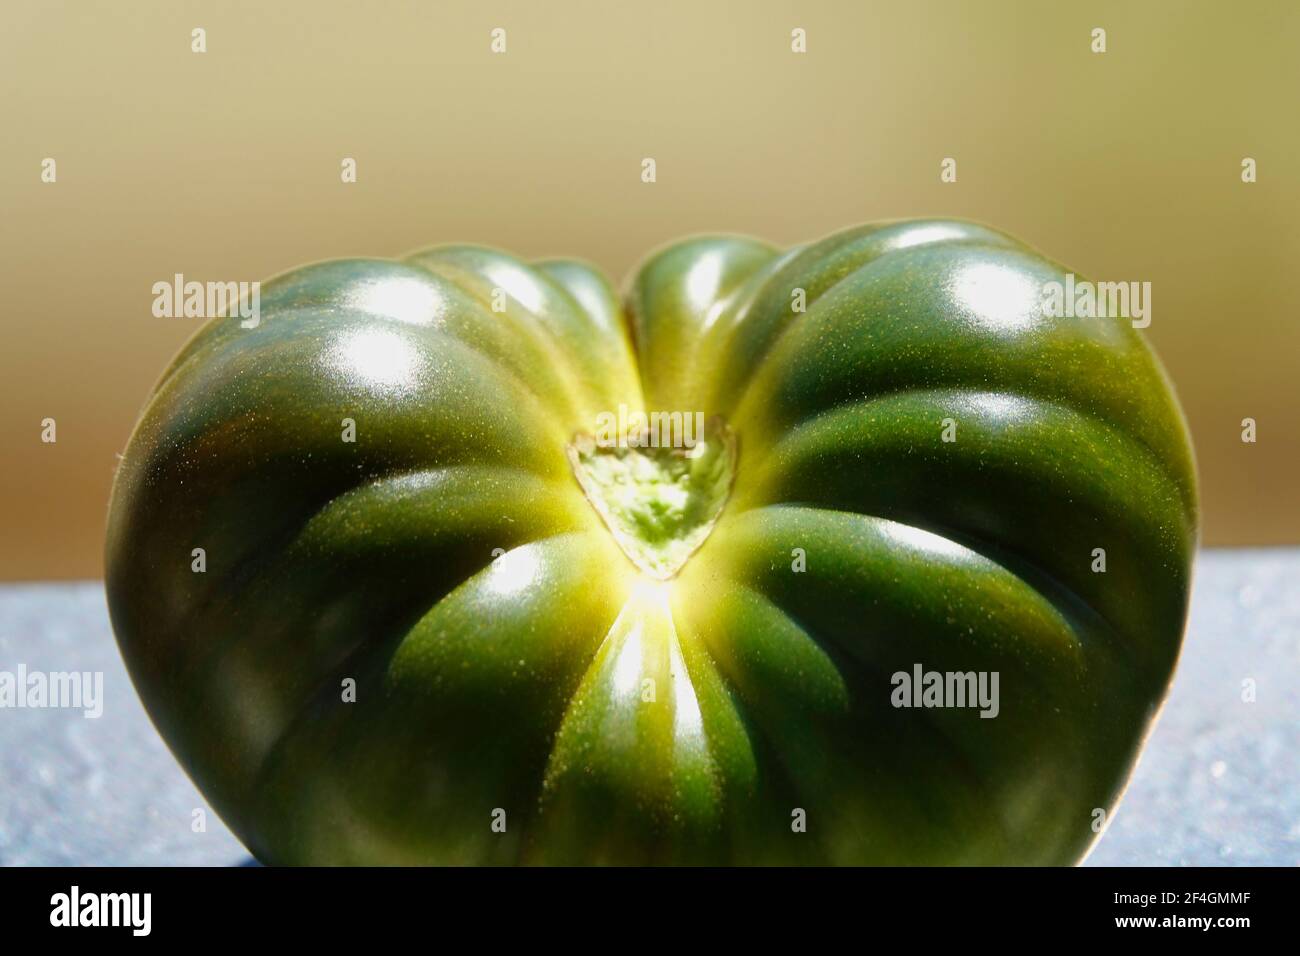 Detail of a delicious fresh green marmande tomato illuminated by sunlight Stock Photo